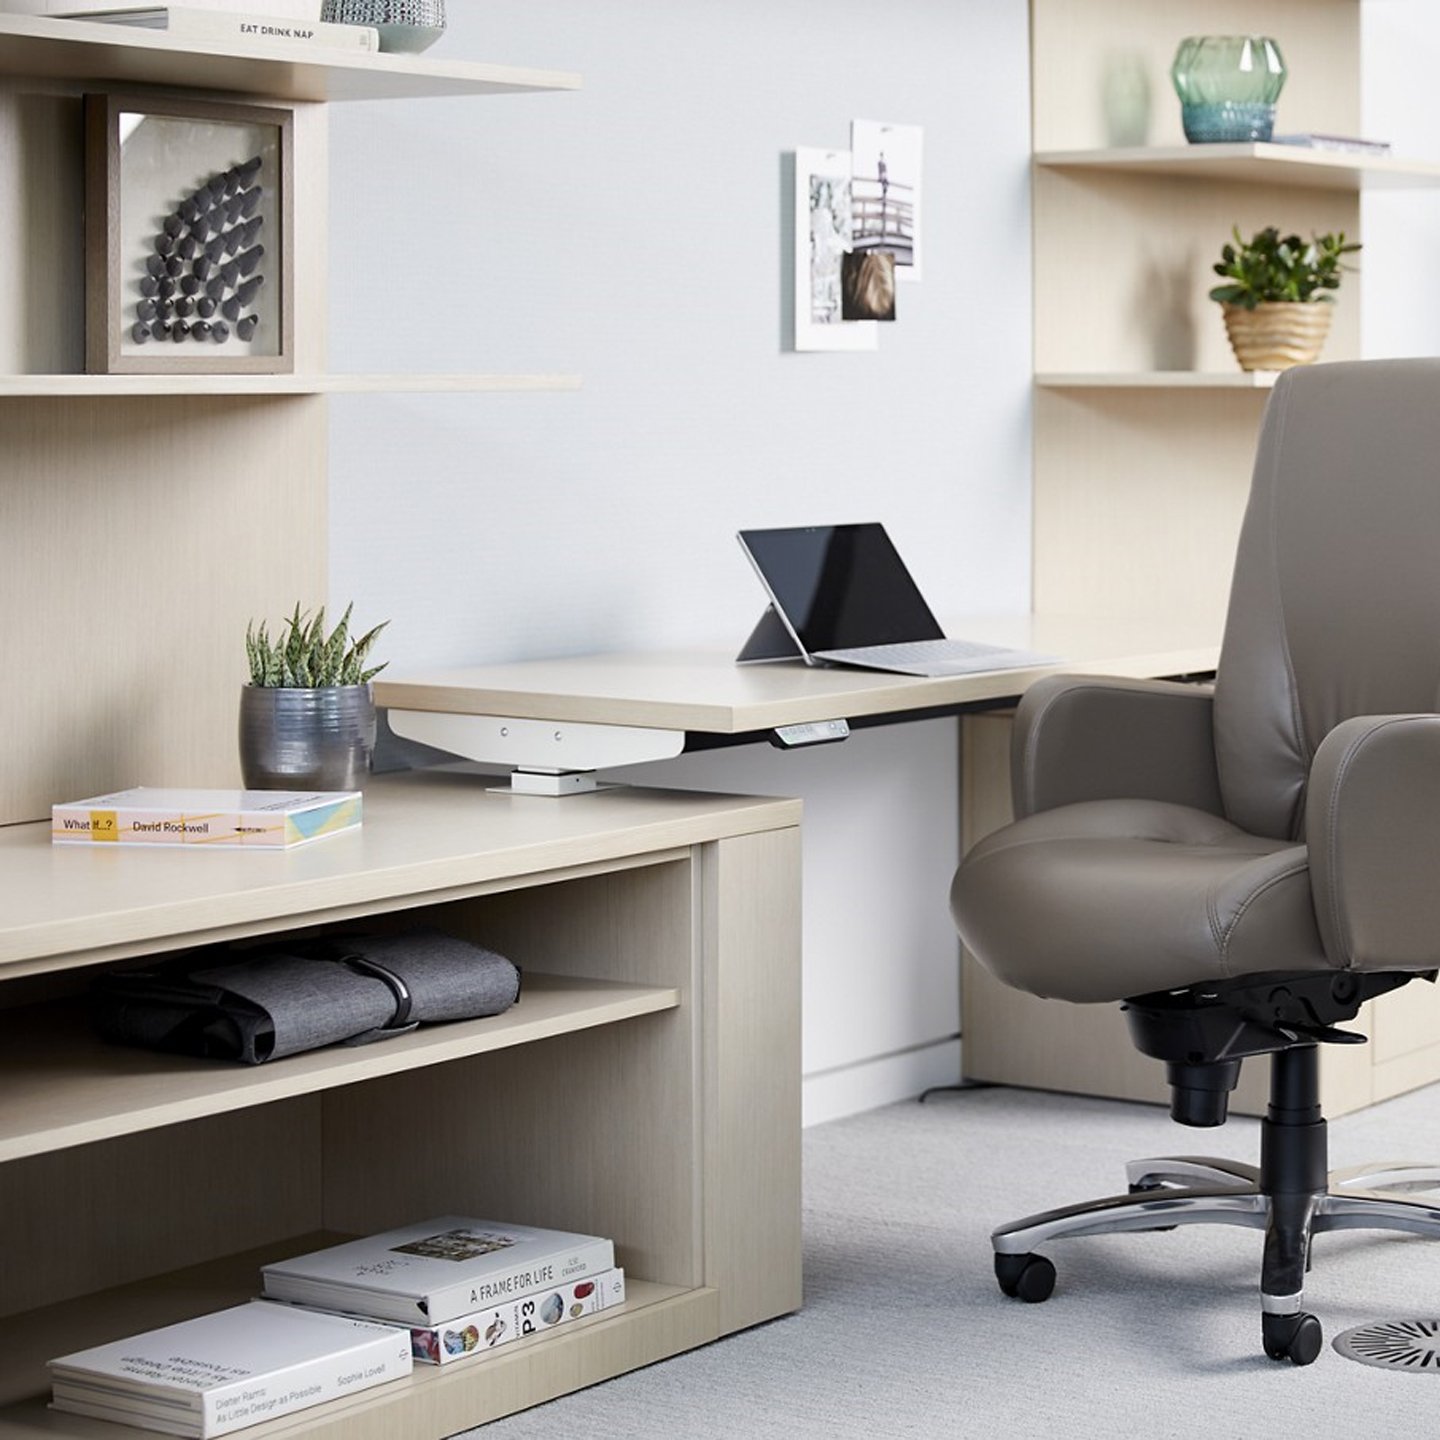 Haworth Masters Series Workspace Veneer height adjustable desk in private office space and grey chair with shelving unit